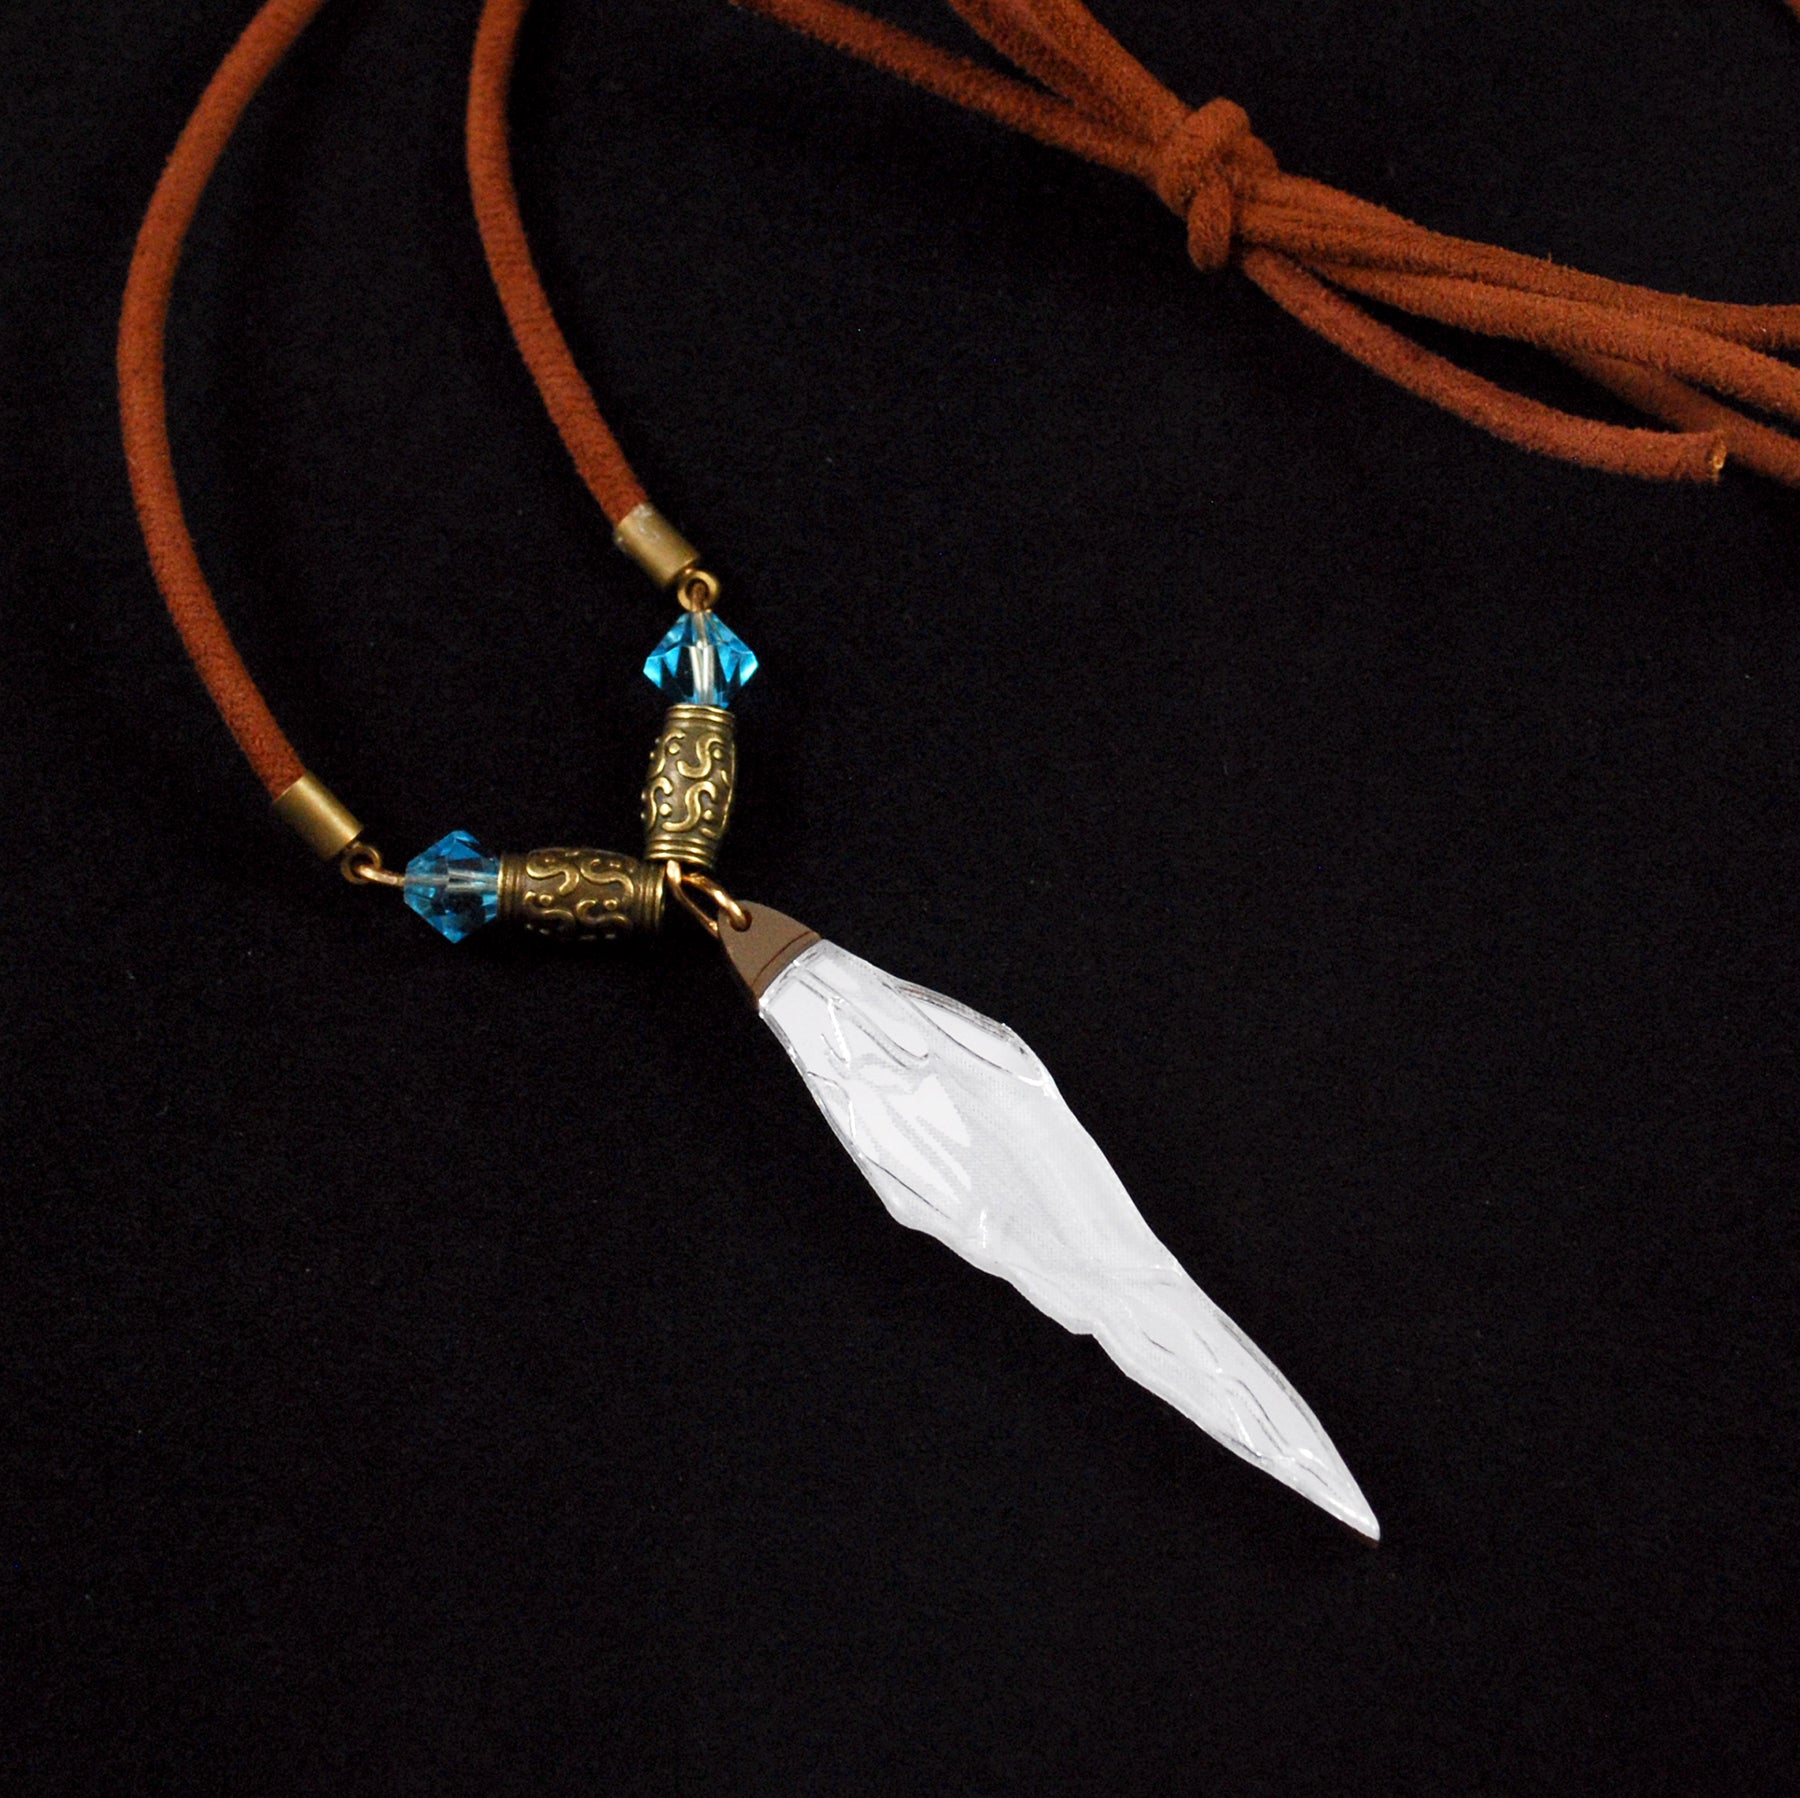 FFXIV Memories of Shiva - Ryne and Gaia's Ice Crystal Necklace in Acry ...